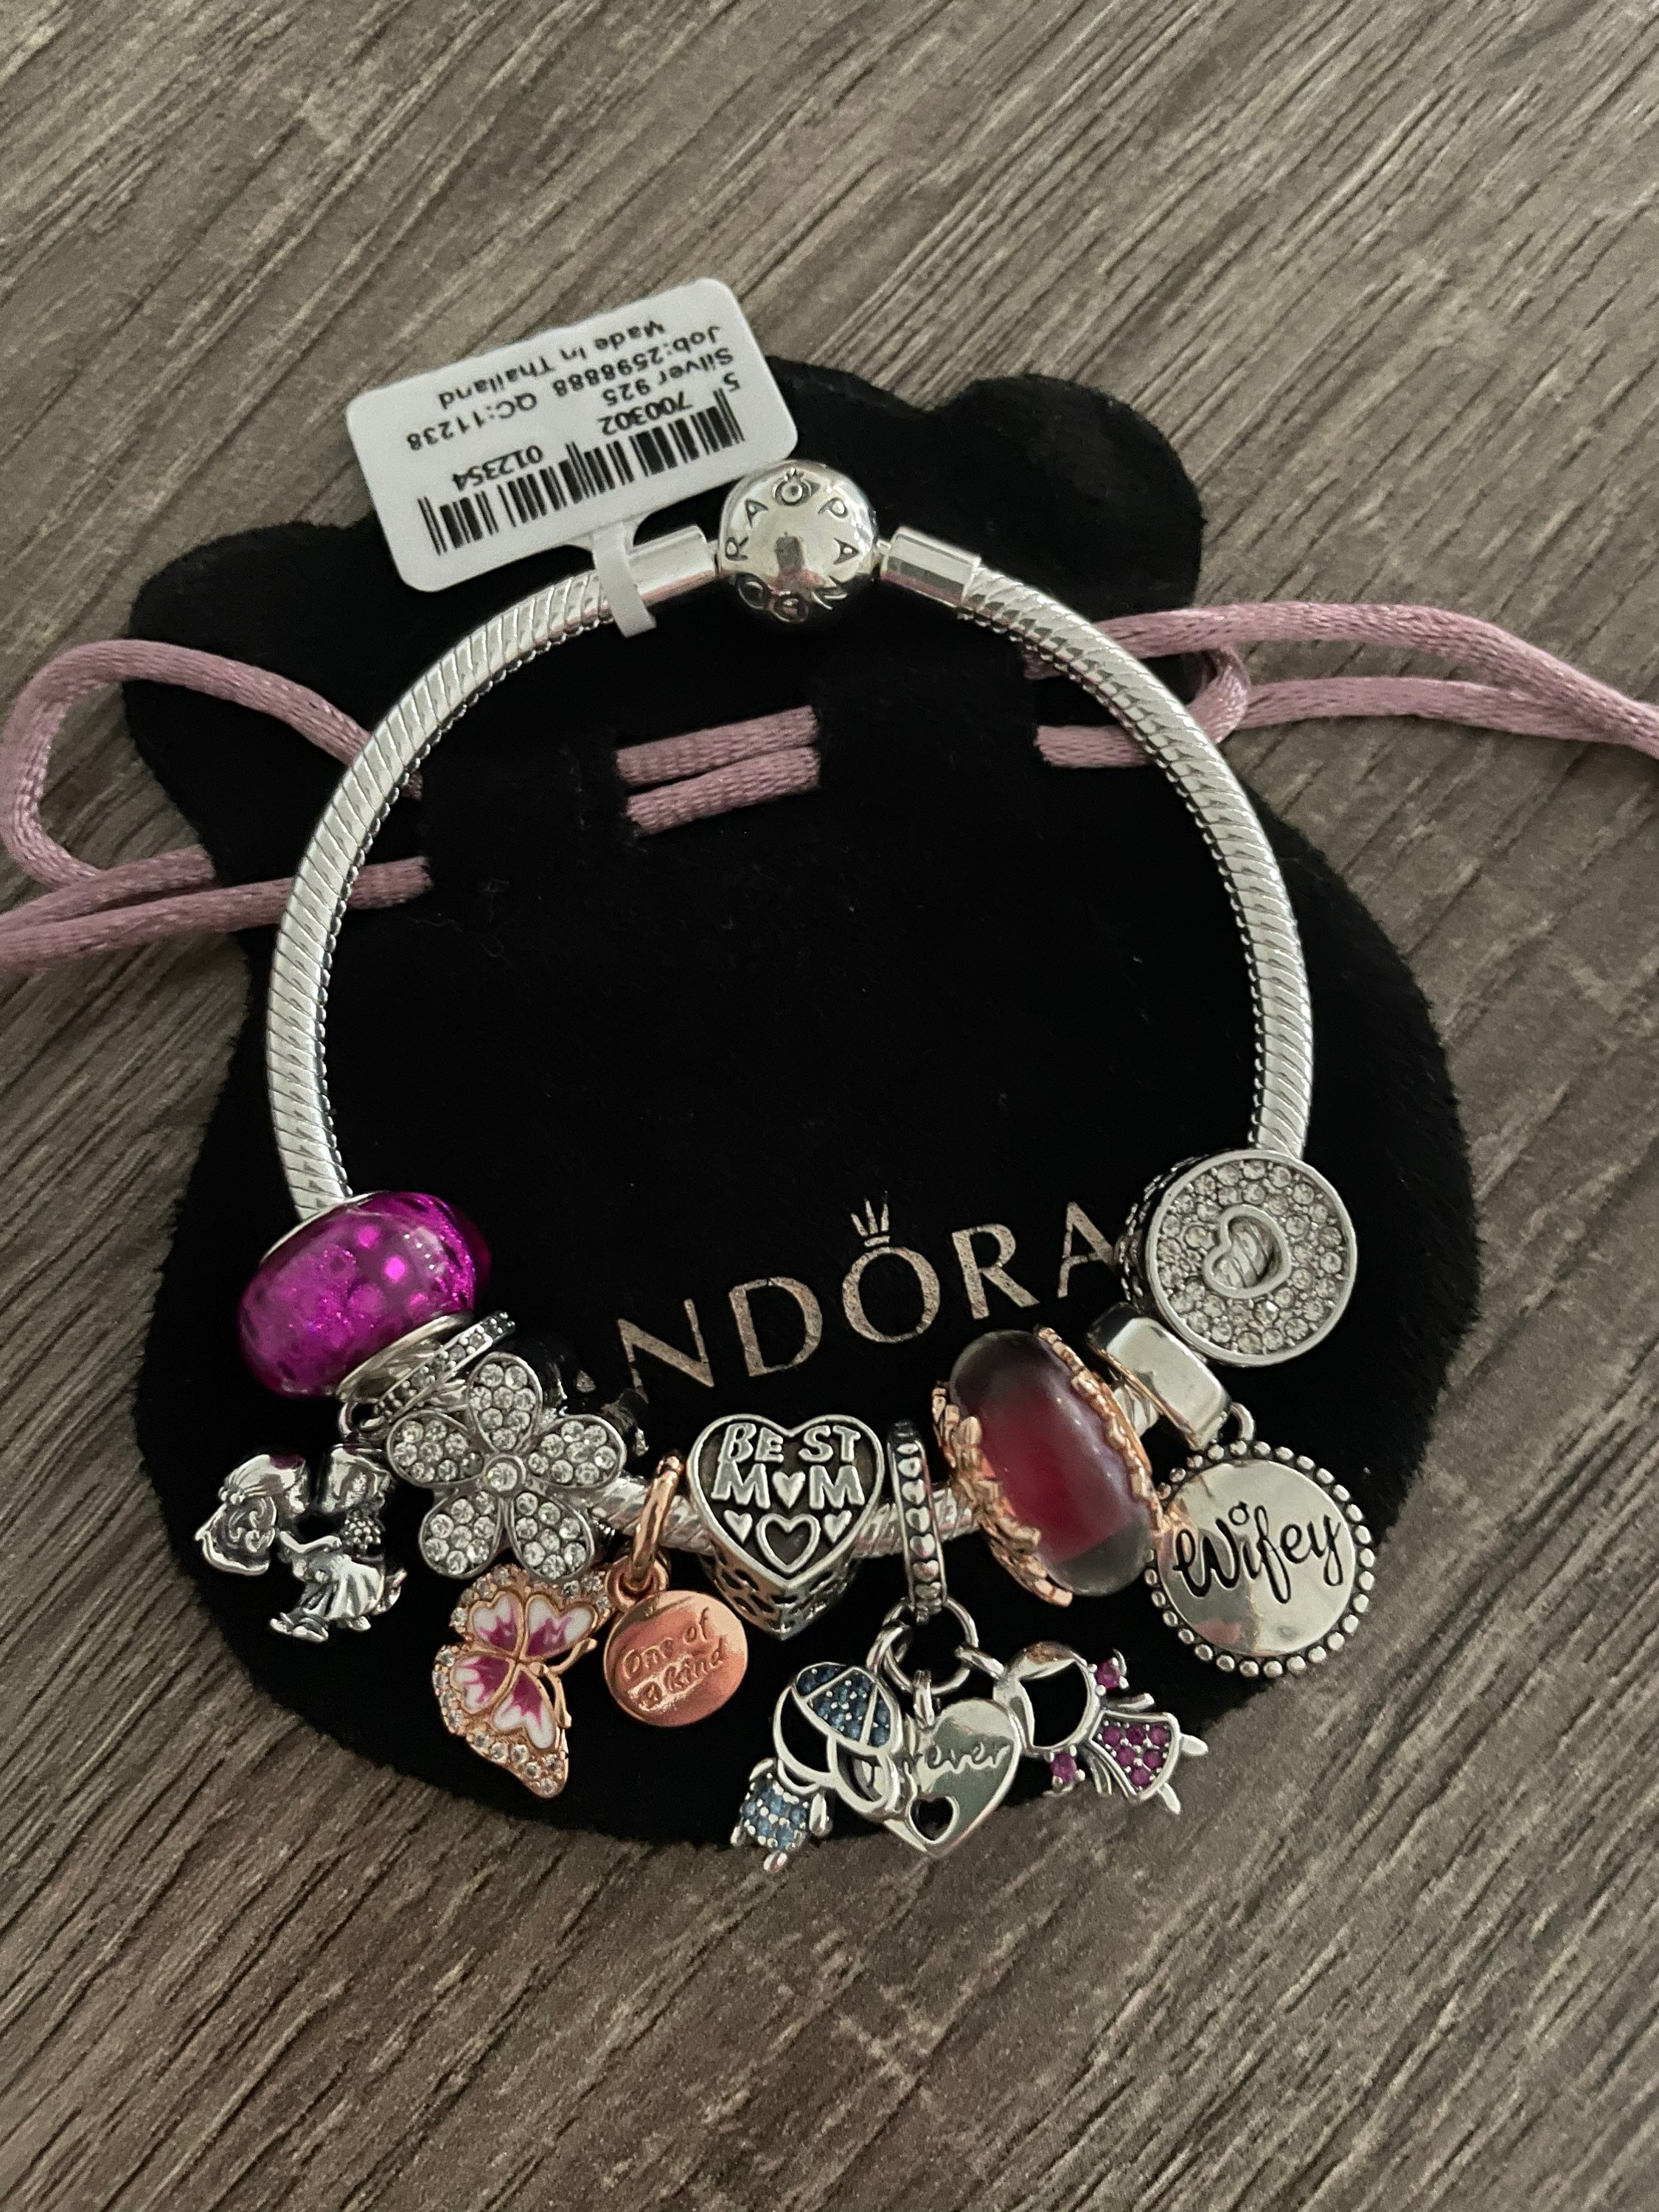 Pandora Bracelet With Wife and Mom Themed Charms - Etsy